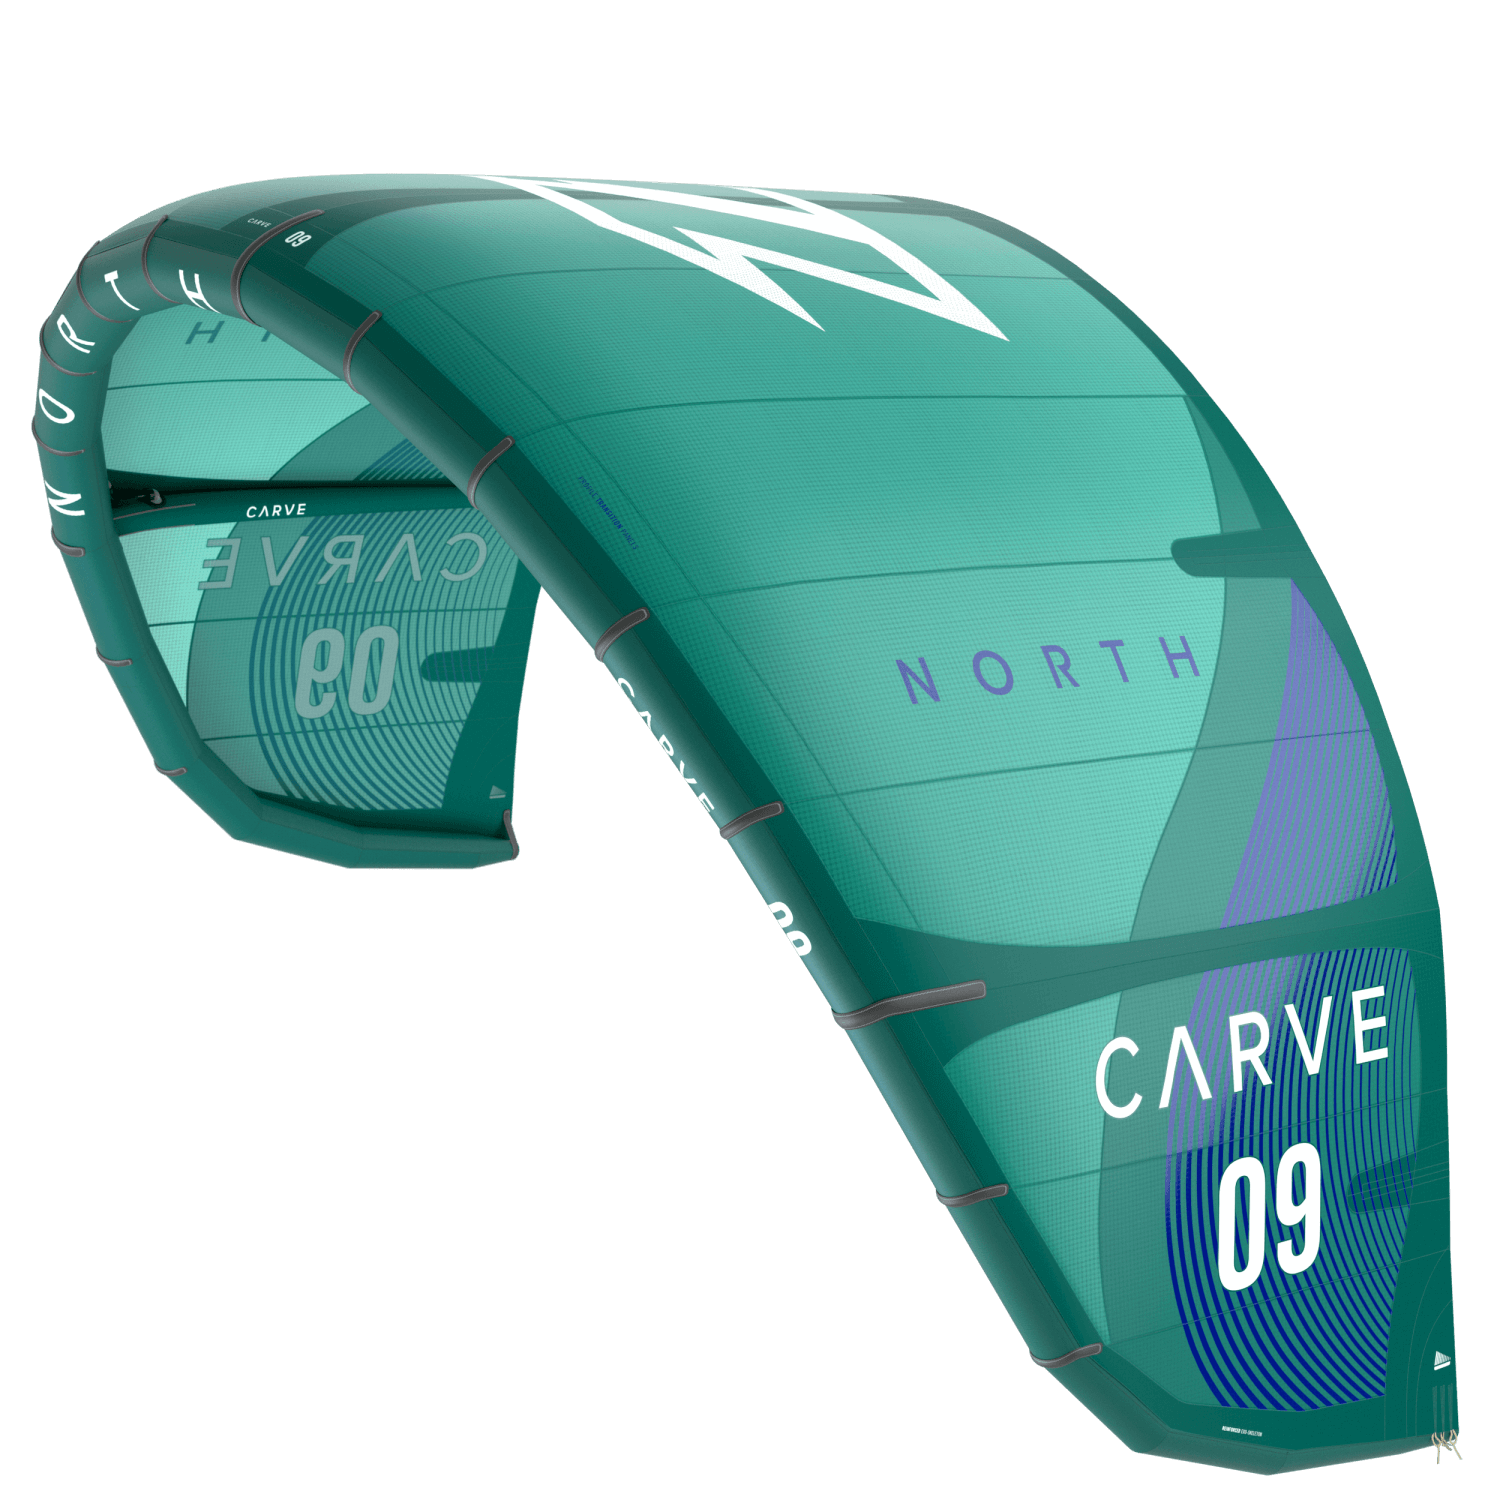 North 2021 Carve / Kite Only